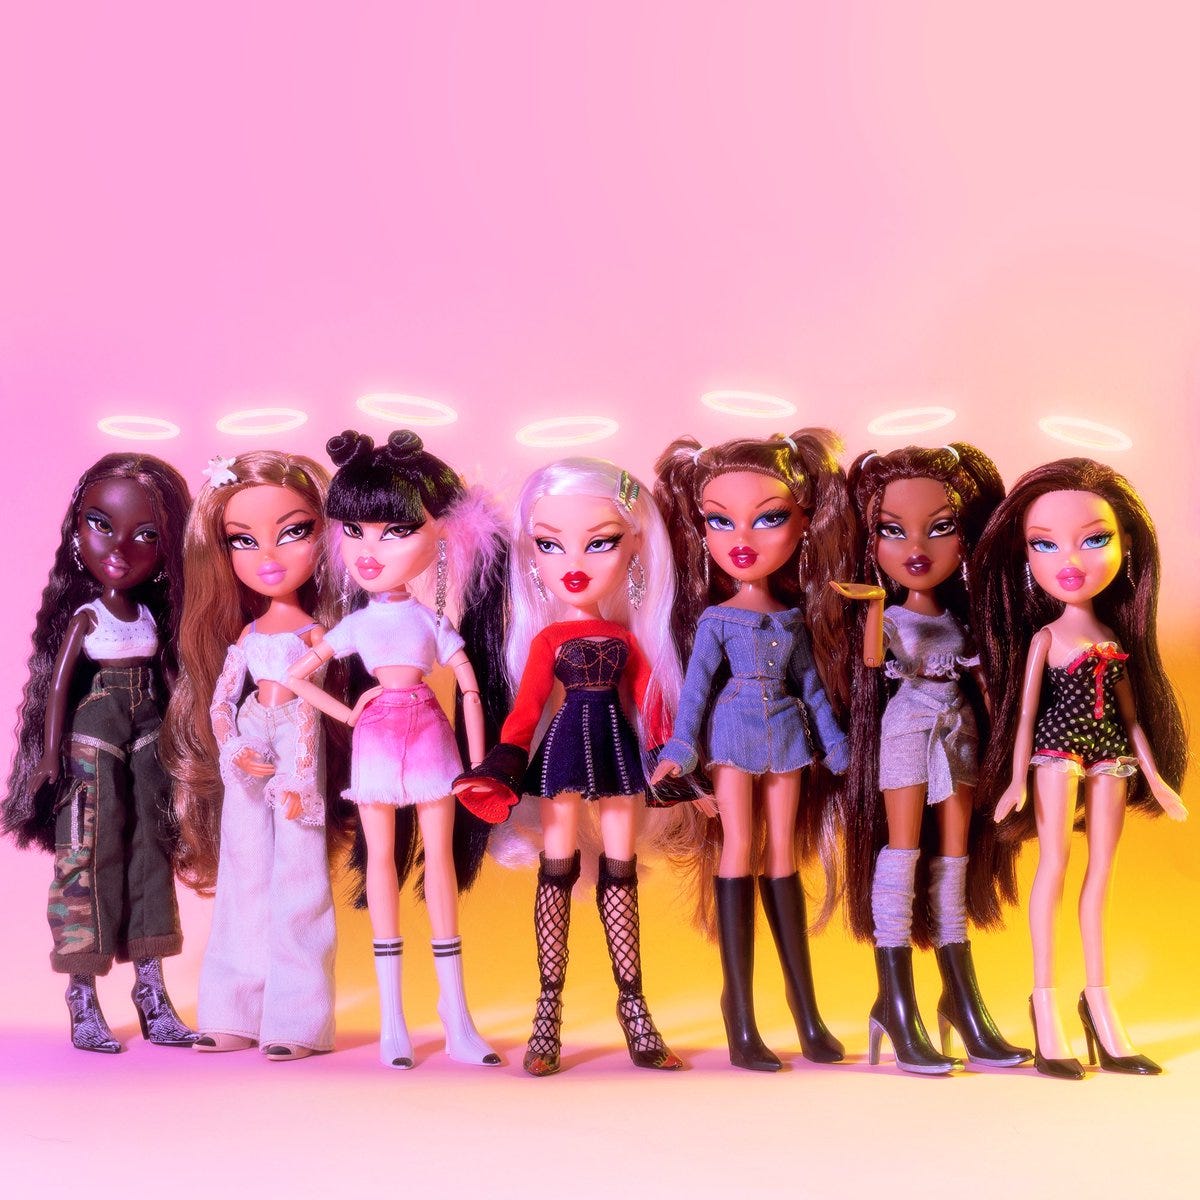 Sparkles, spunk & sex appeal: how Bratz became today's cool-girl blueprint, by Sydney Nicole Sweeney